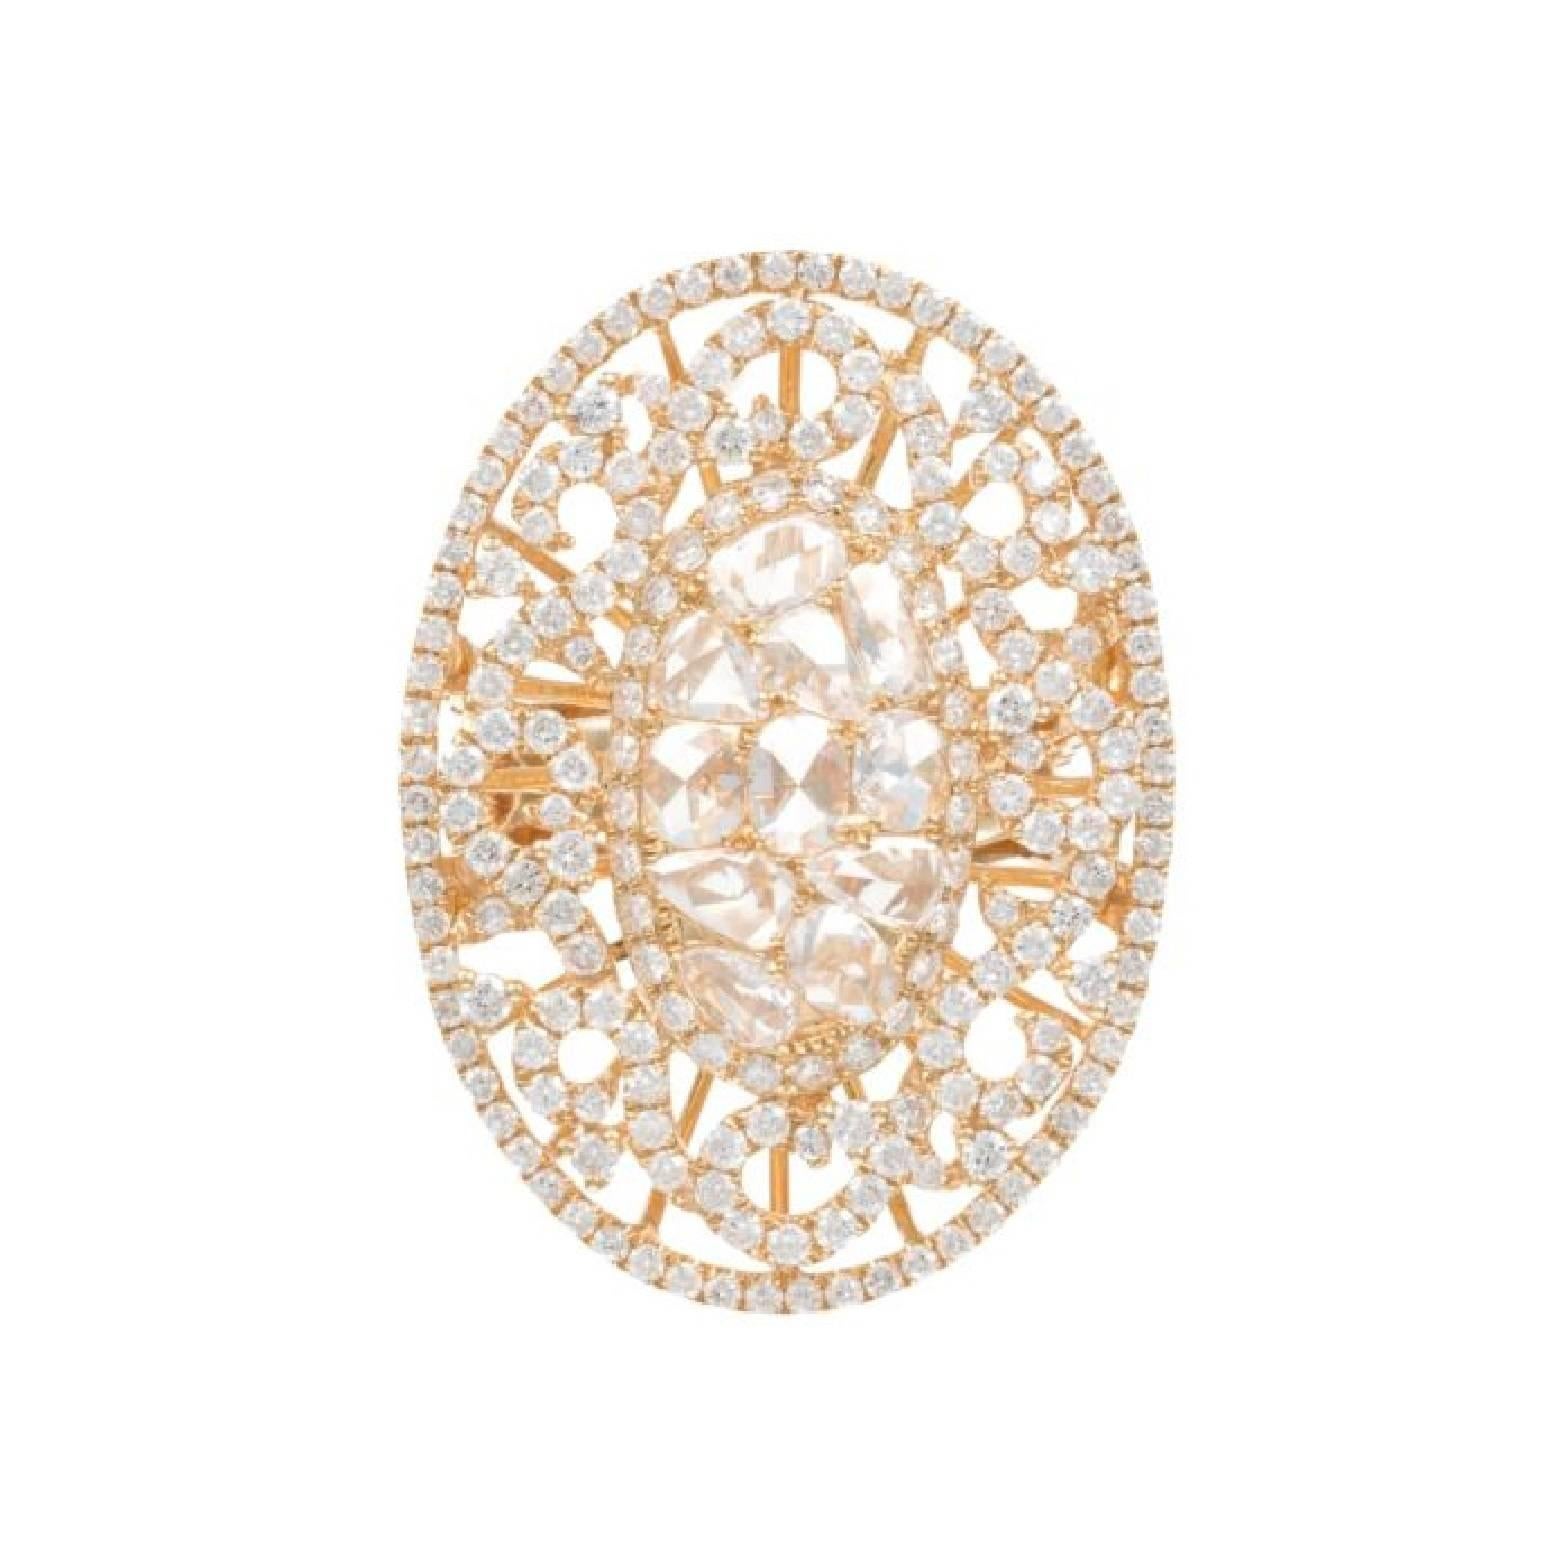 18K yellow gold diamond ring with 5.00 carats of European cut and round brilliant cut diamonds 

Diamond specifications:
F/G color, VS/SI clarity

This product comes with a certificate of appraisal
This product will be packaged in a custom